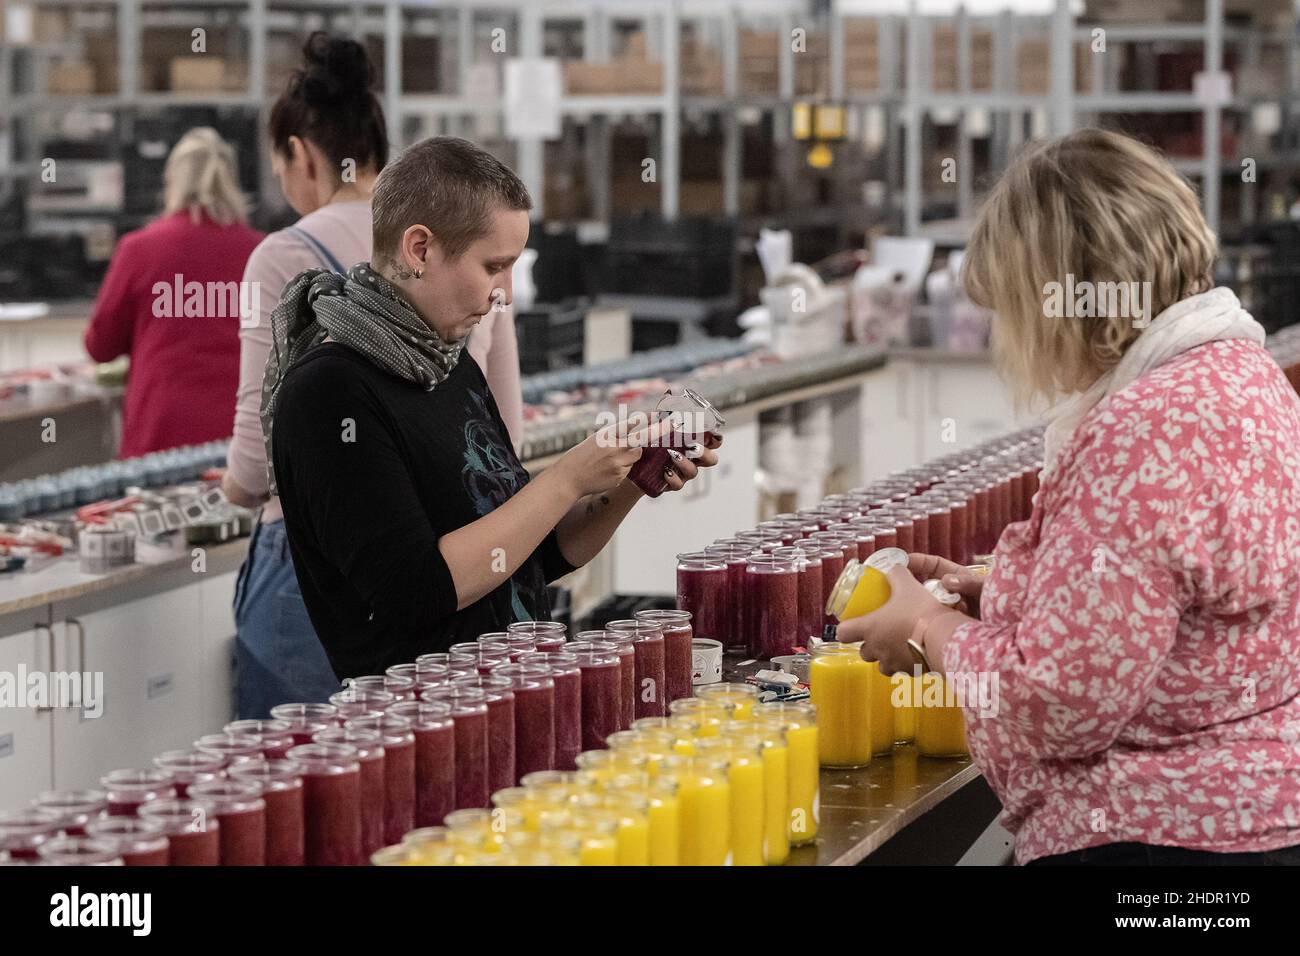 https://c8.alamy.com/comp/2HDR1YD/production-07-december-2021-lower-saxony-nesselrden-female-employees-label-candle-jars-at-the-candle-factory-candle-factory-has-been-producing-candles-from-sustainably-grown-stearin-in-eichsfeld-near-duderstadt-since-2006-photo-swen-pfrtnerdpa-2HDR1YD.jpg